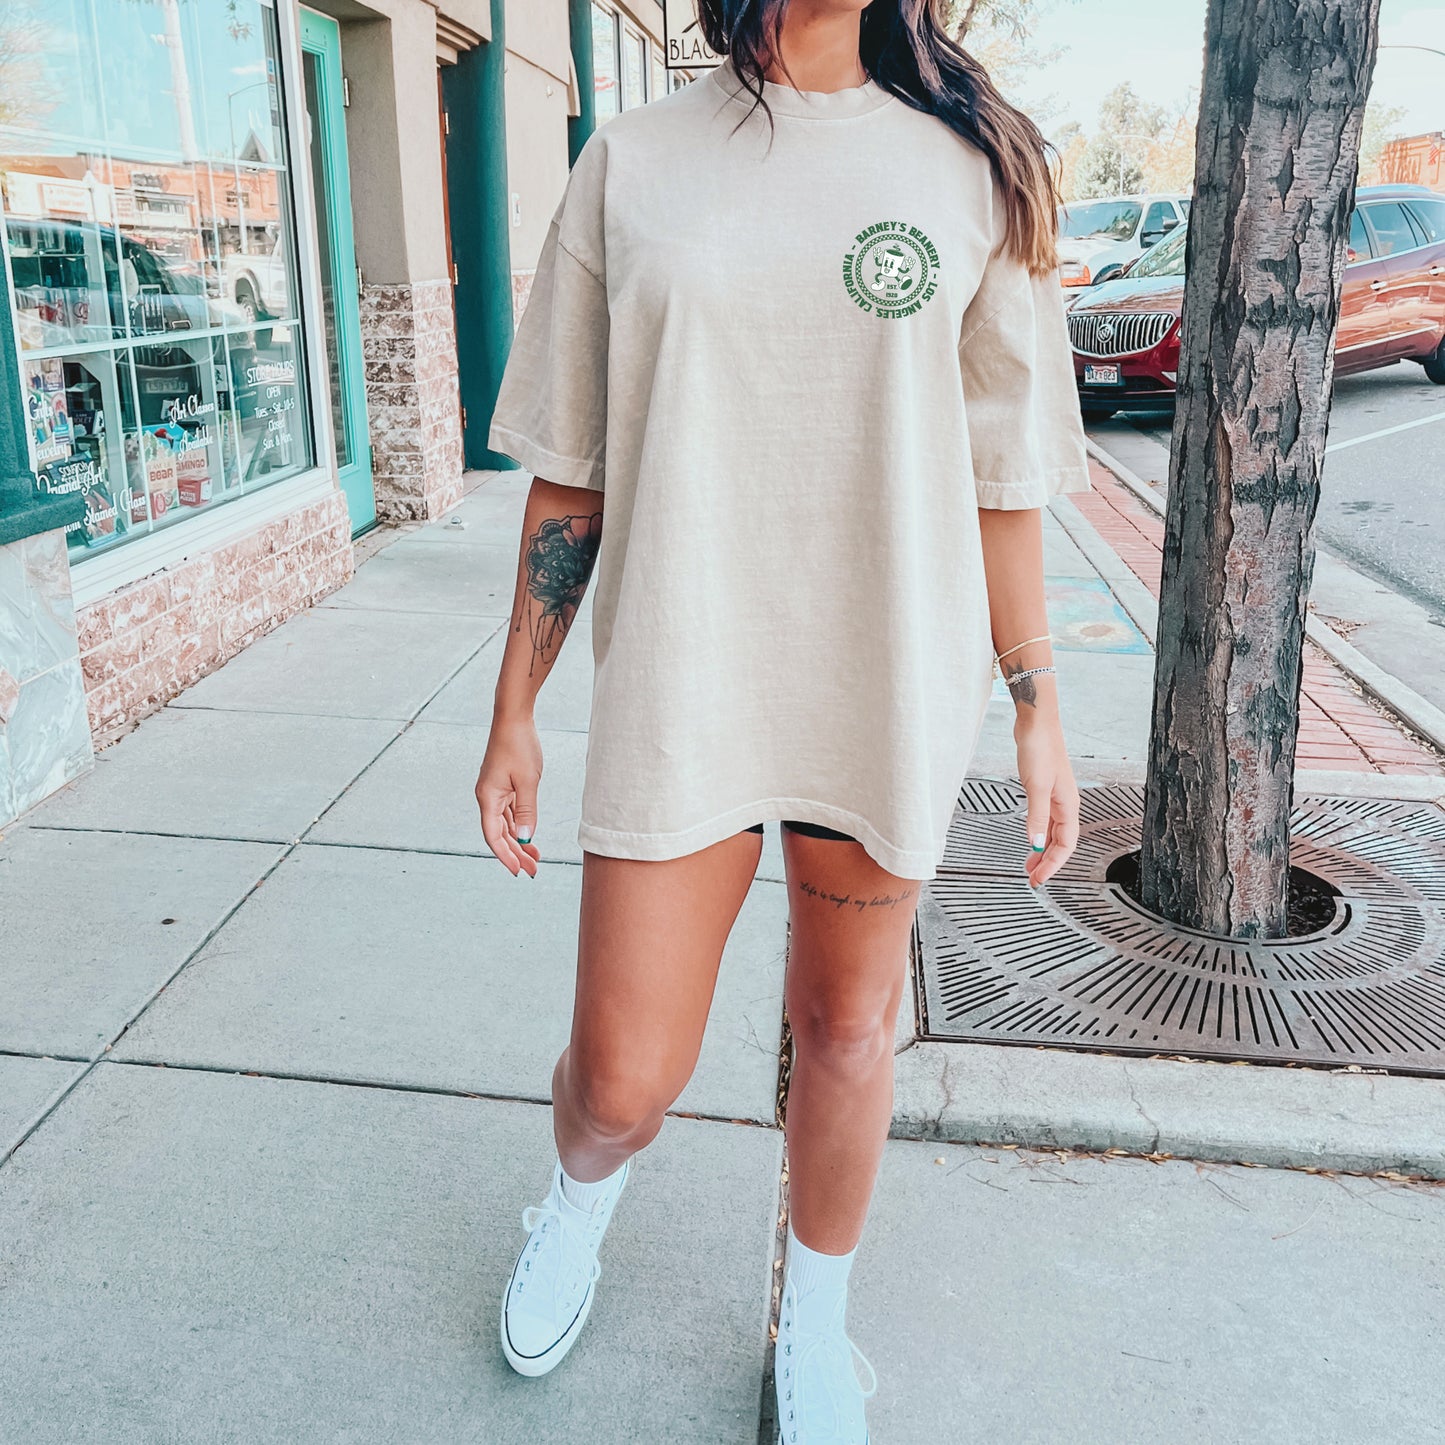 Eat More Chili. Drink More Beer. | BARNEY'S BEANERY - Women's Retro Graphic Tee | Ivory Comfort Colors 1717 T-Shirt - Green Badge Graphic On Front View Of Female Lifestyle Image